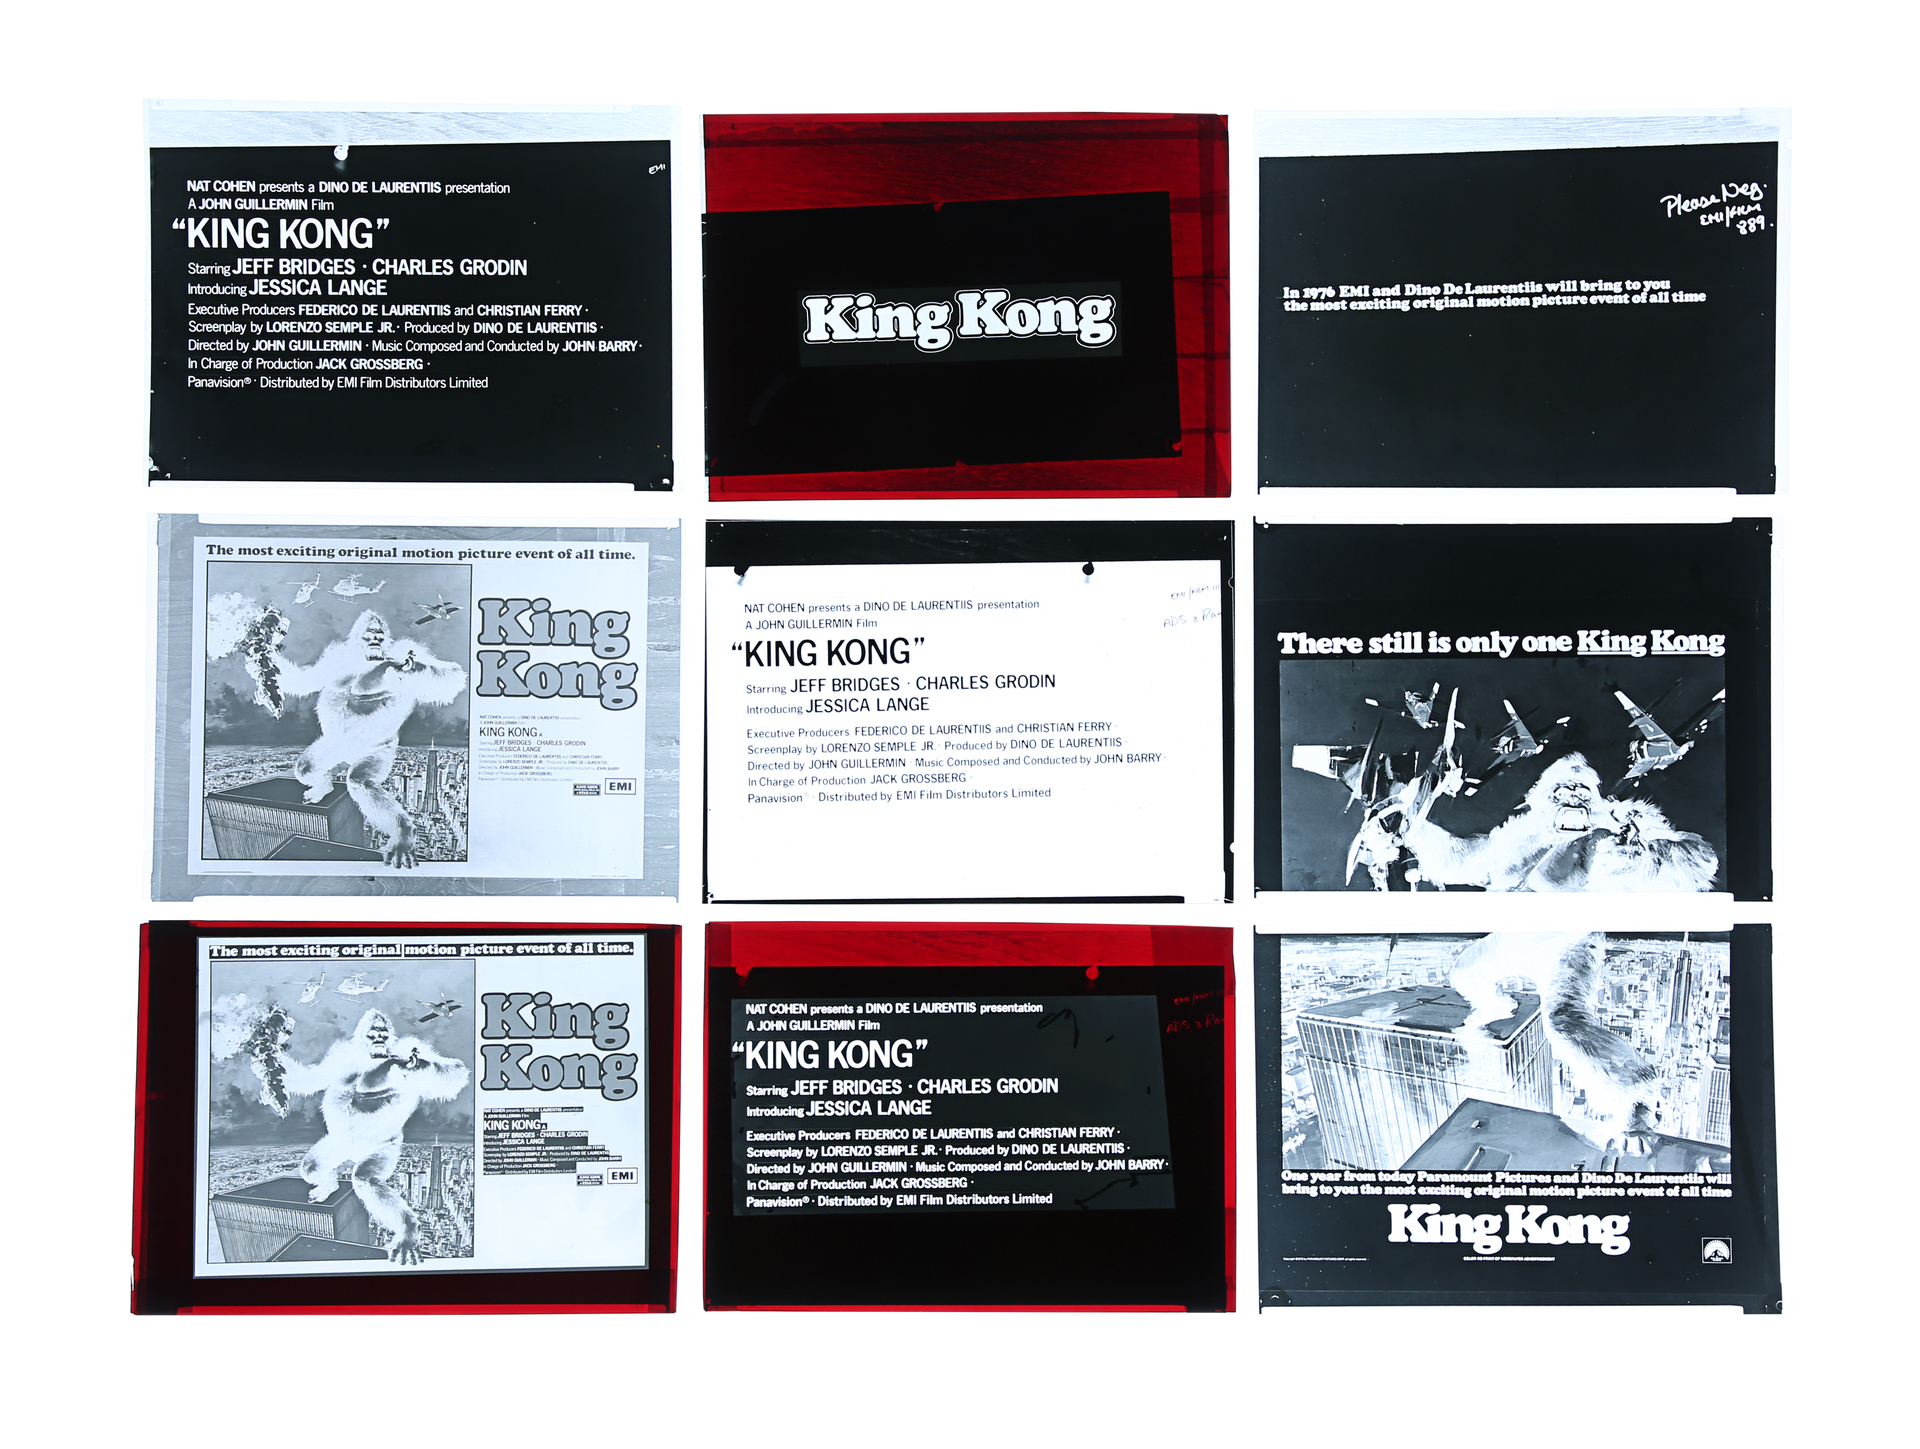 KING KONG (1976) - FEREF ARCHIVE: 1 of 1 Proof Print, with Original Transparencies, Negatives and Fi - Image 5 of 5